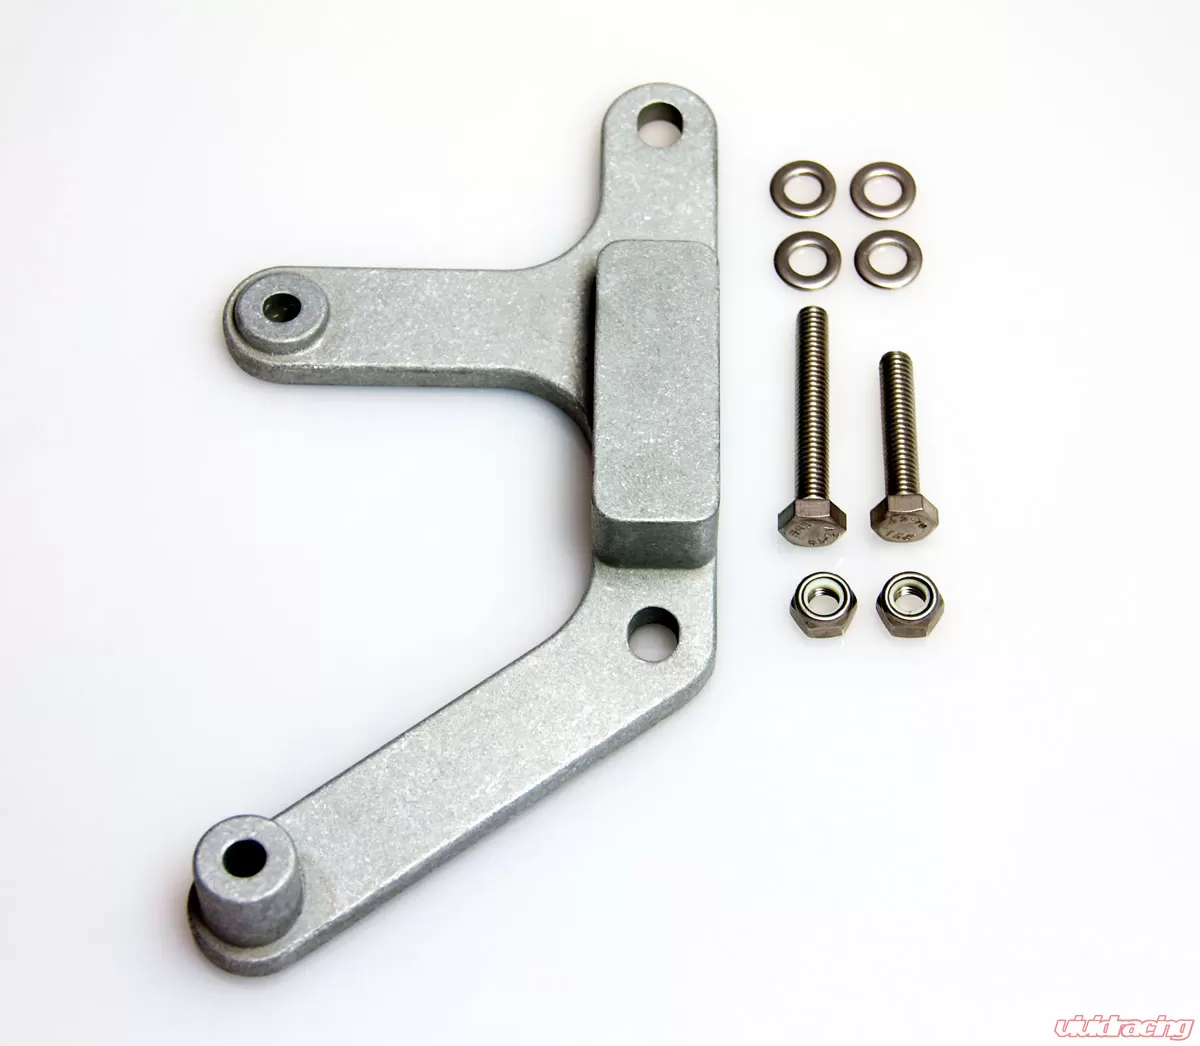 Mustang Coyote Swap Fox Pedal Bracket 79 04 Ford Mustang J M Products